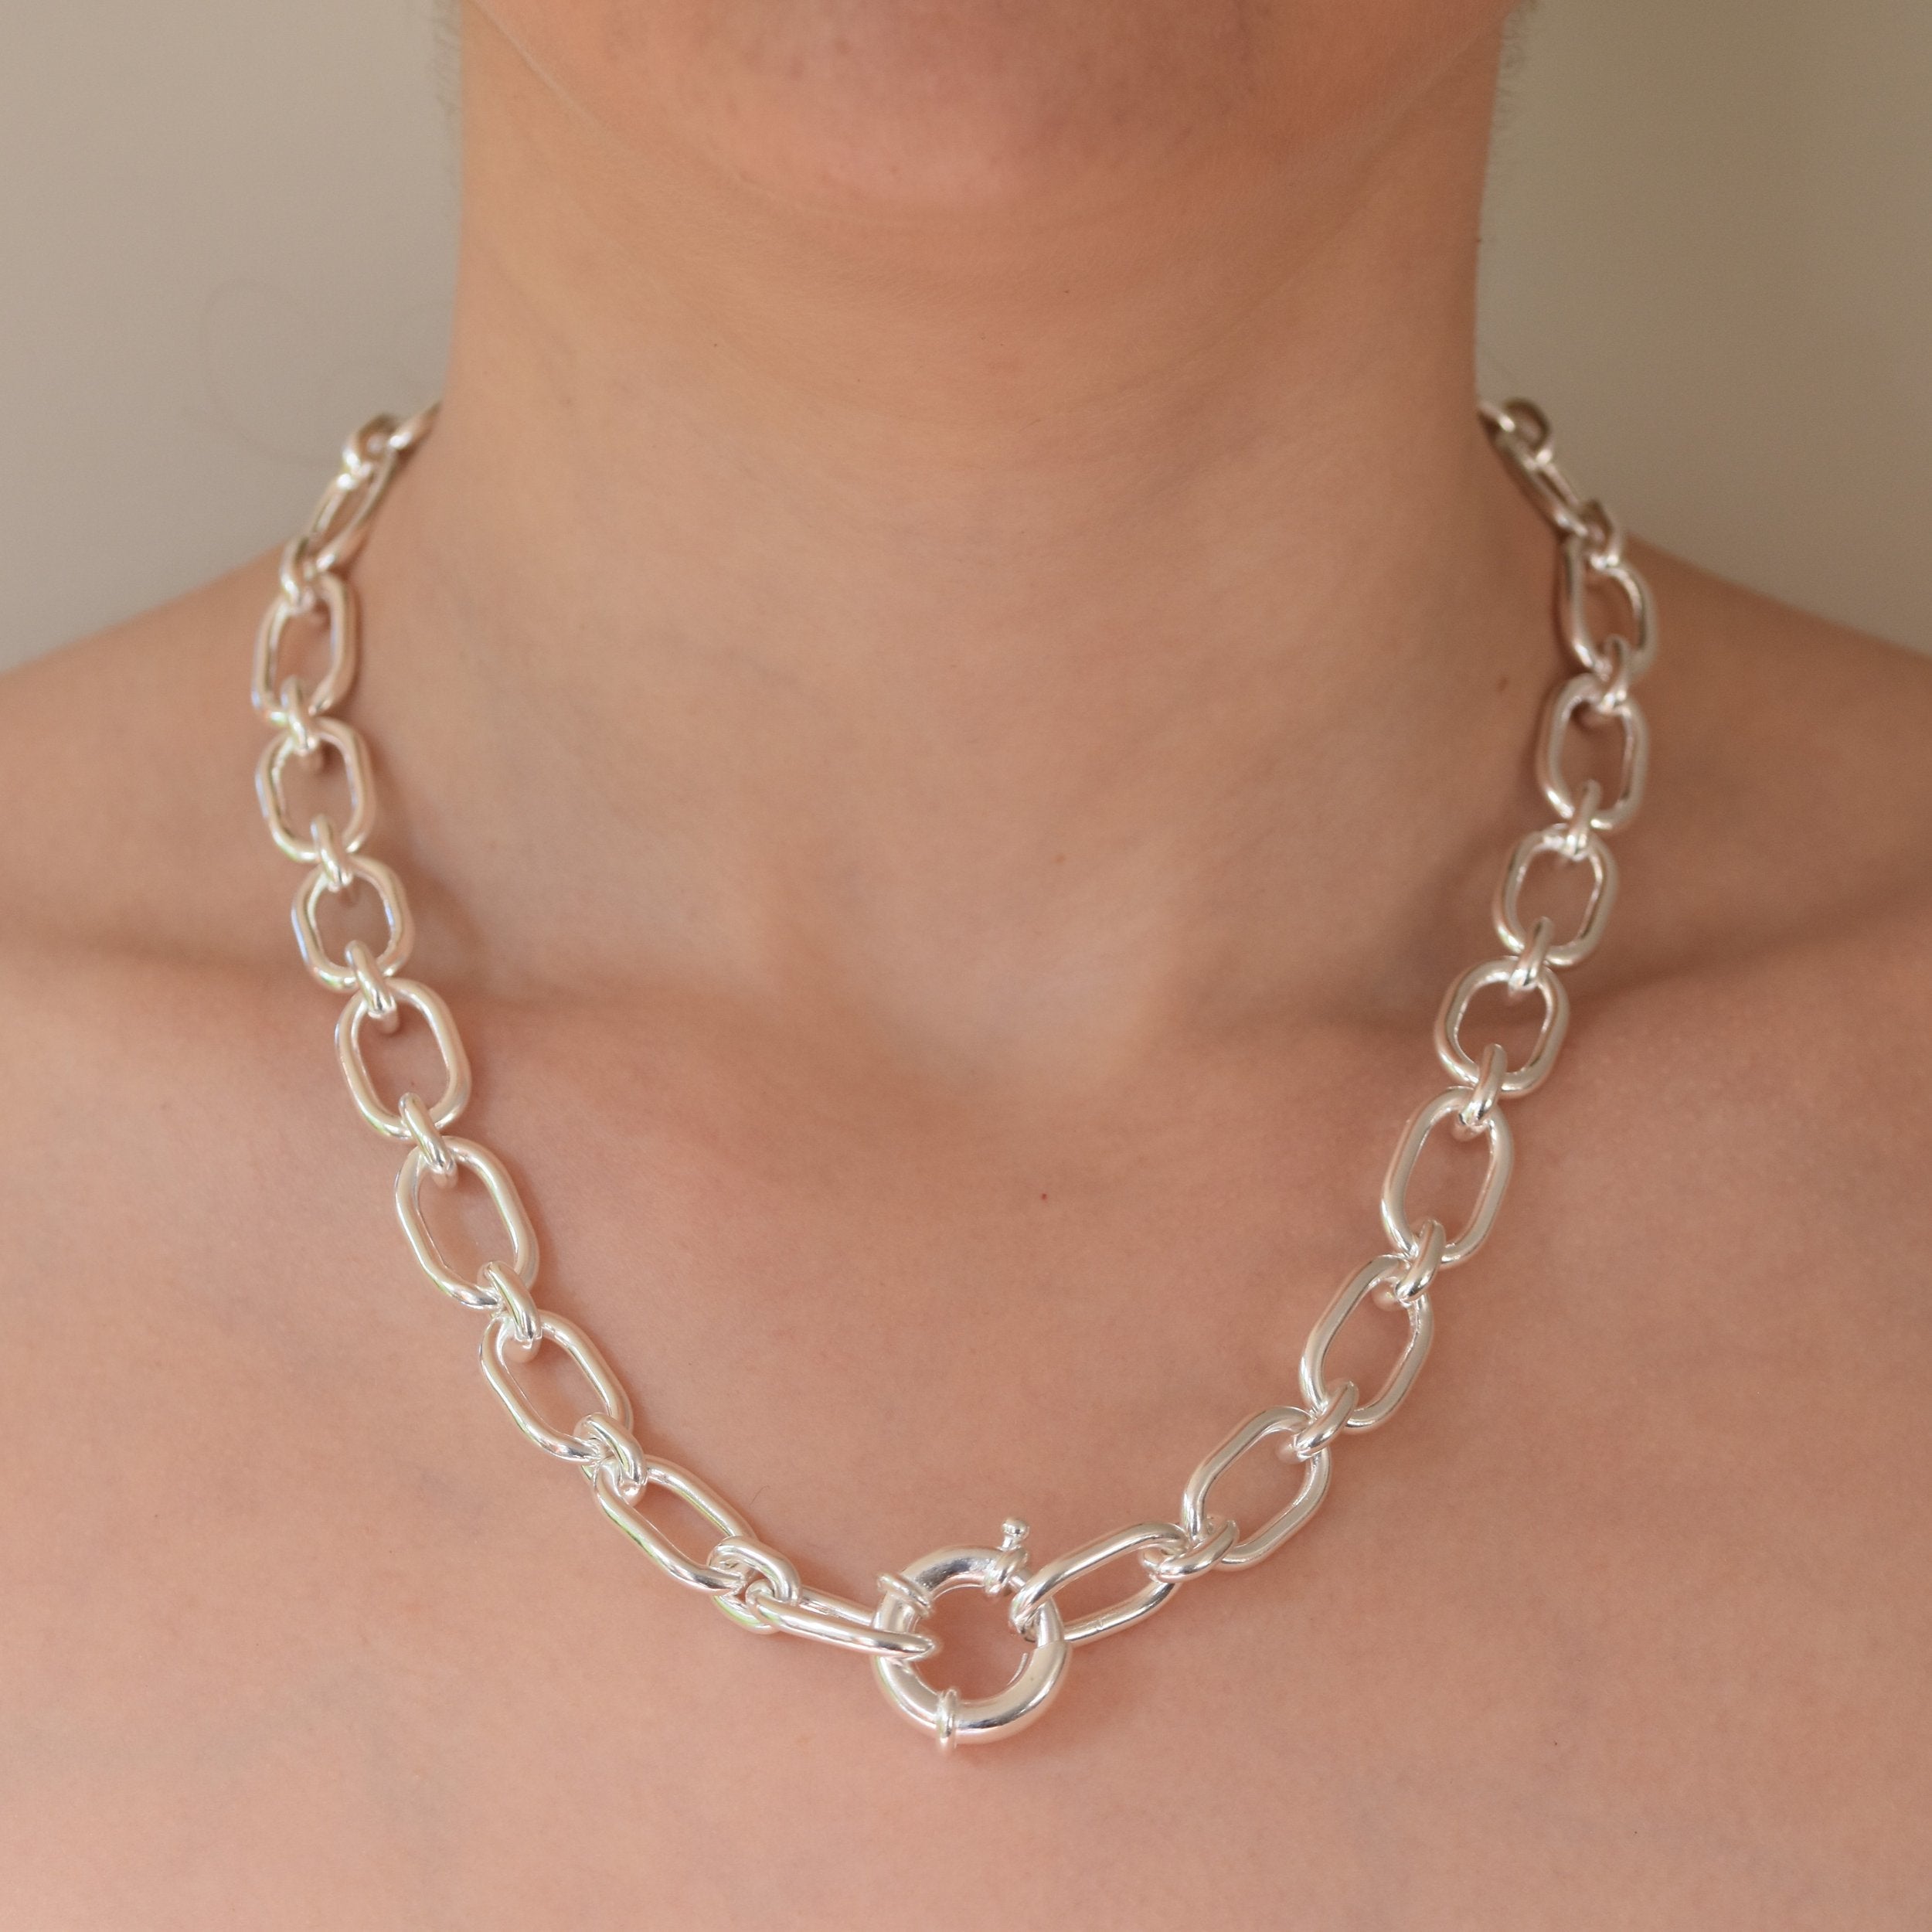 Double Link Silver Chain